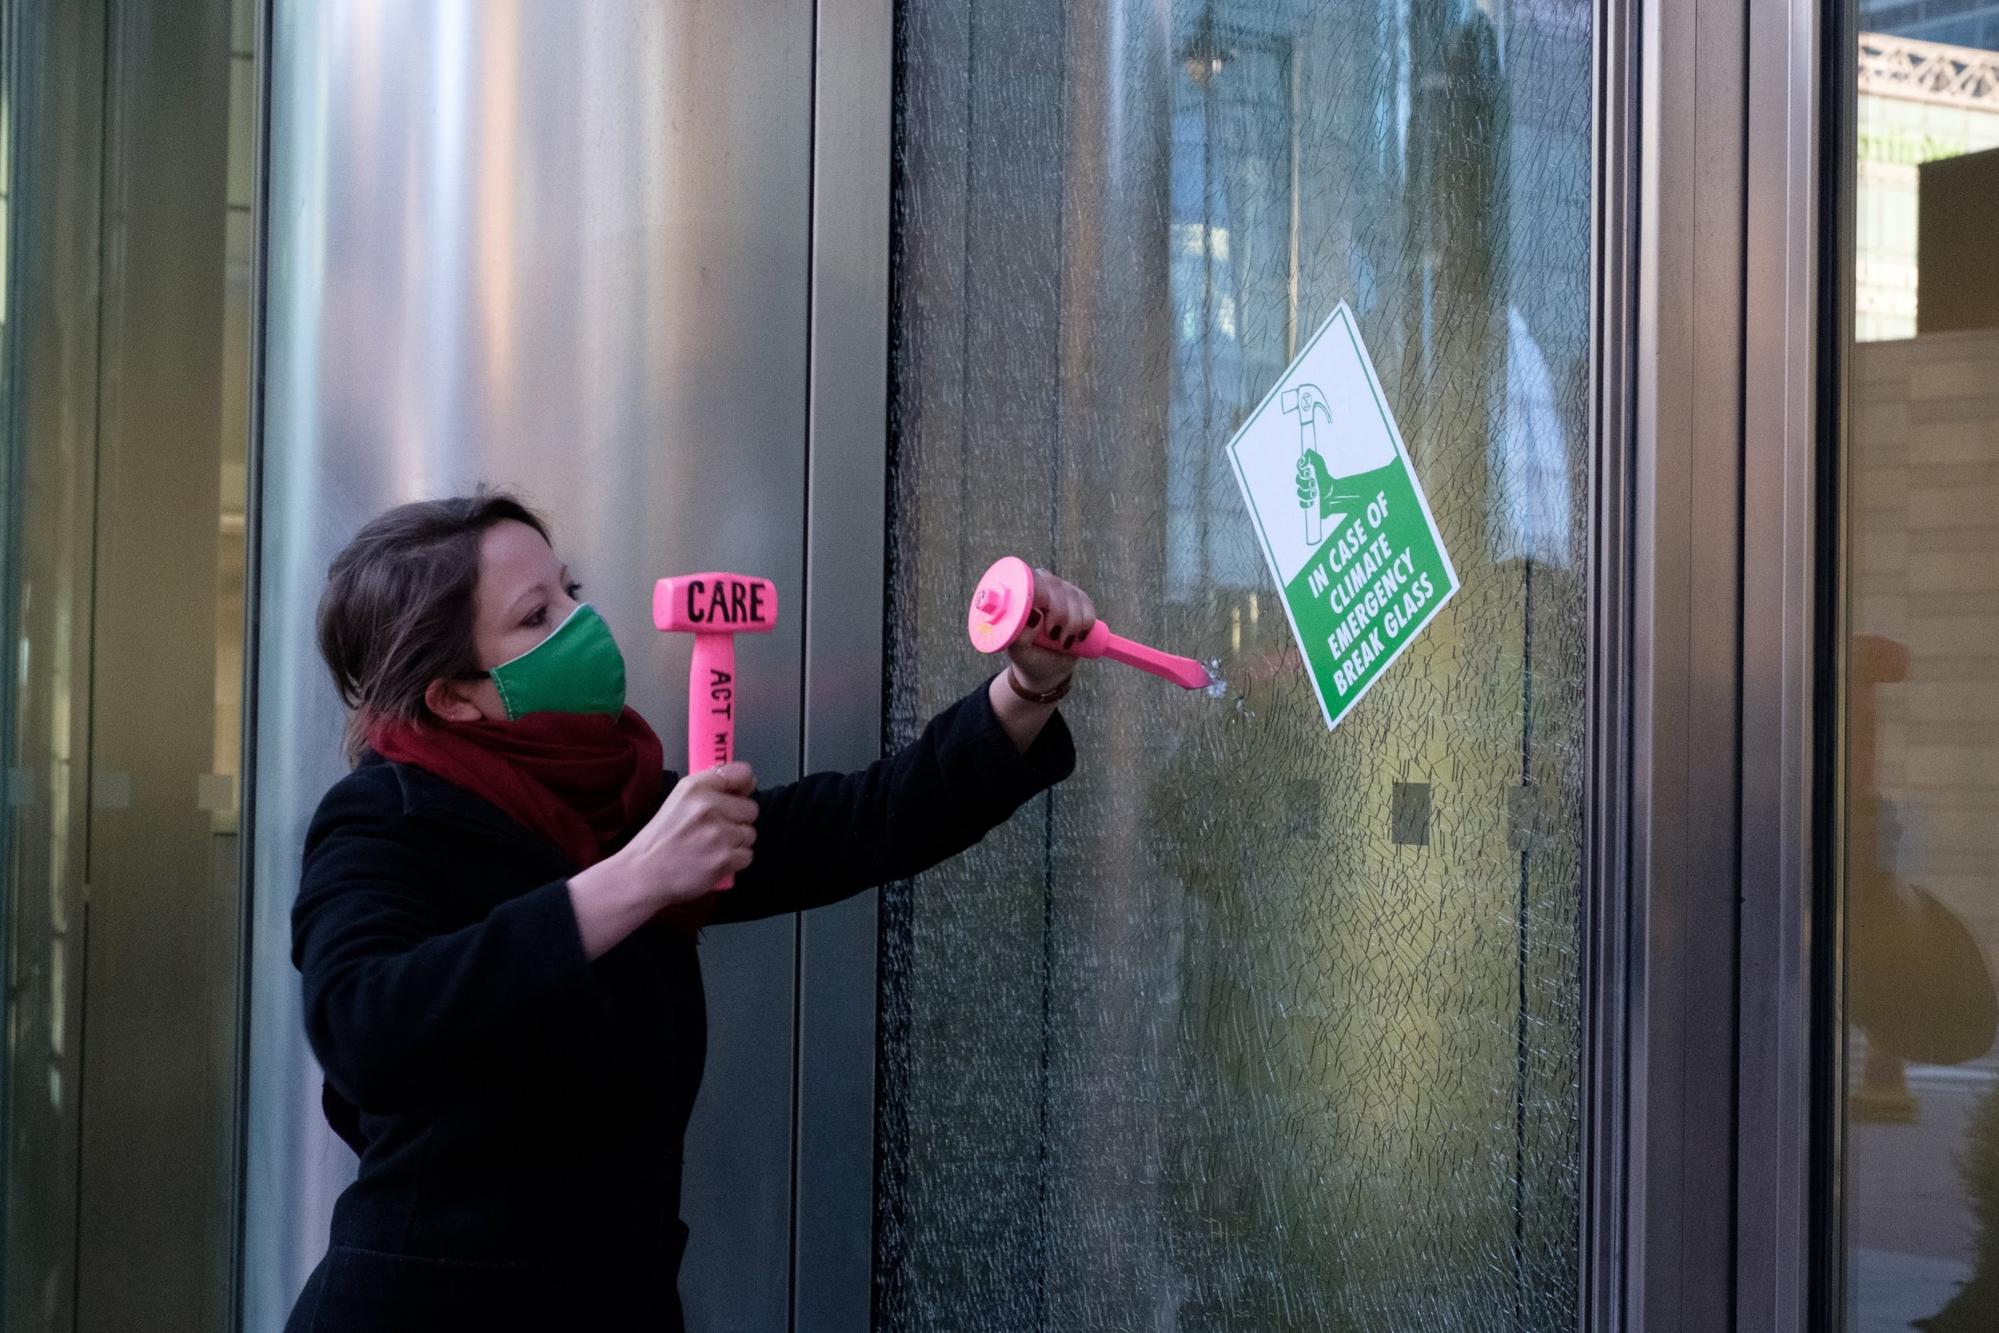 London, UK. 7 women rebels break windows of Barclays HQ, the 7th dirtiestbank, inspired by the suffragettes who broke windows in their fight to winwomen the vote. 